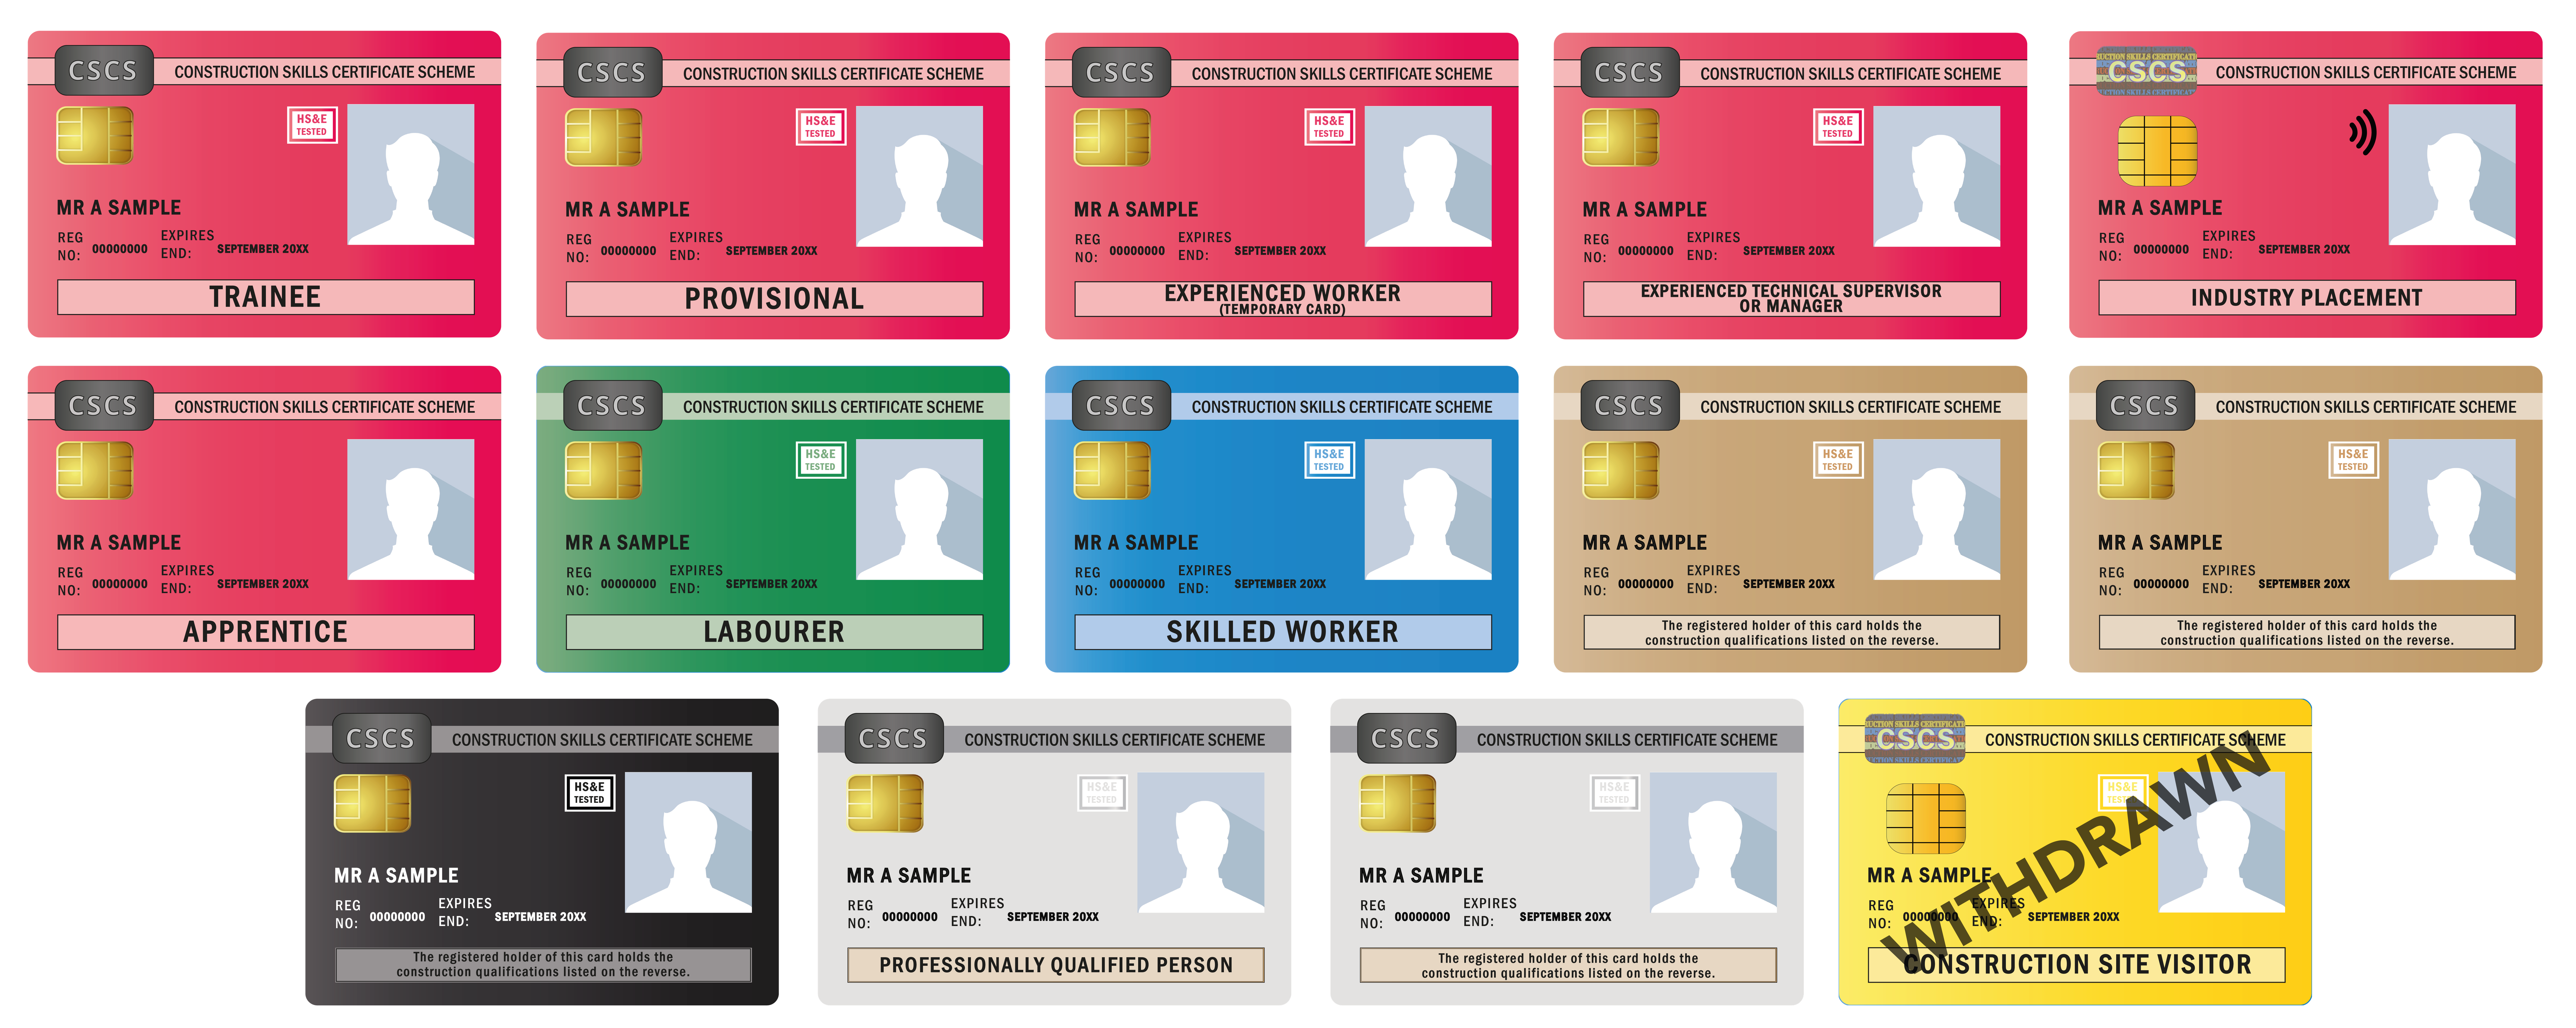 Image shows all types of CSCS Cards